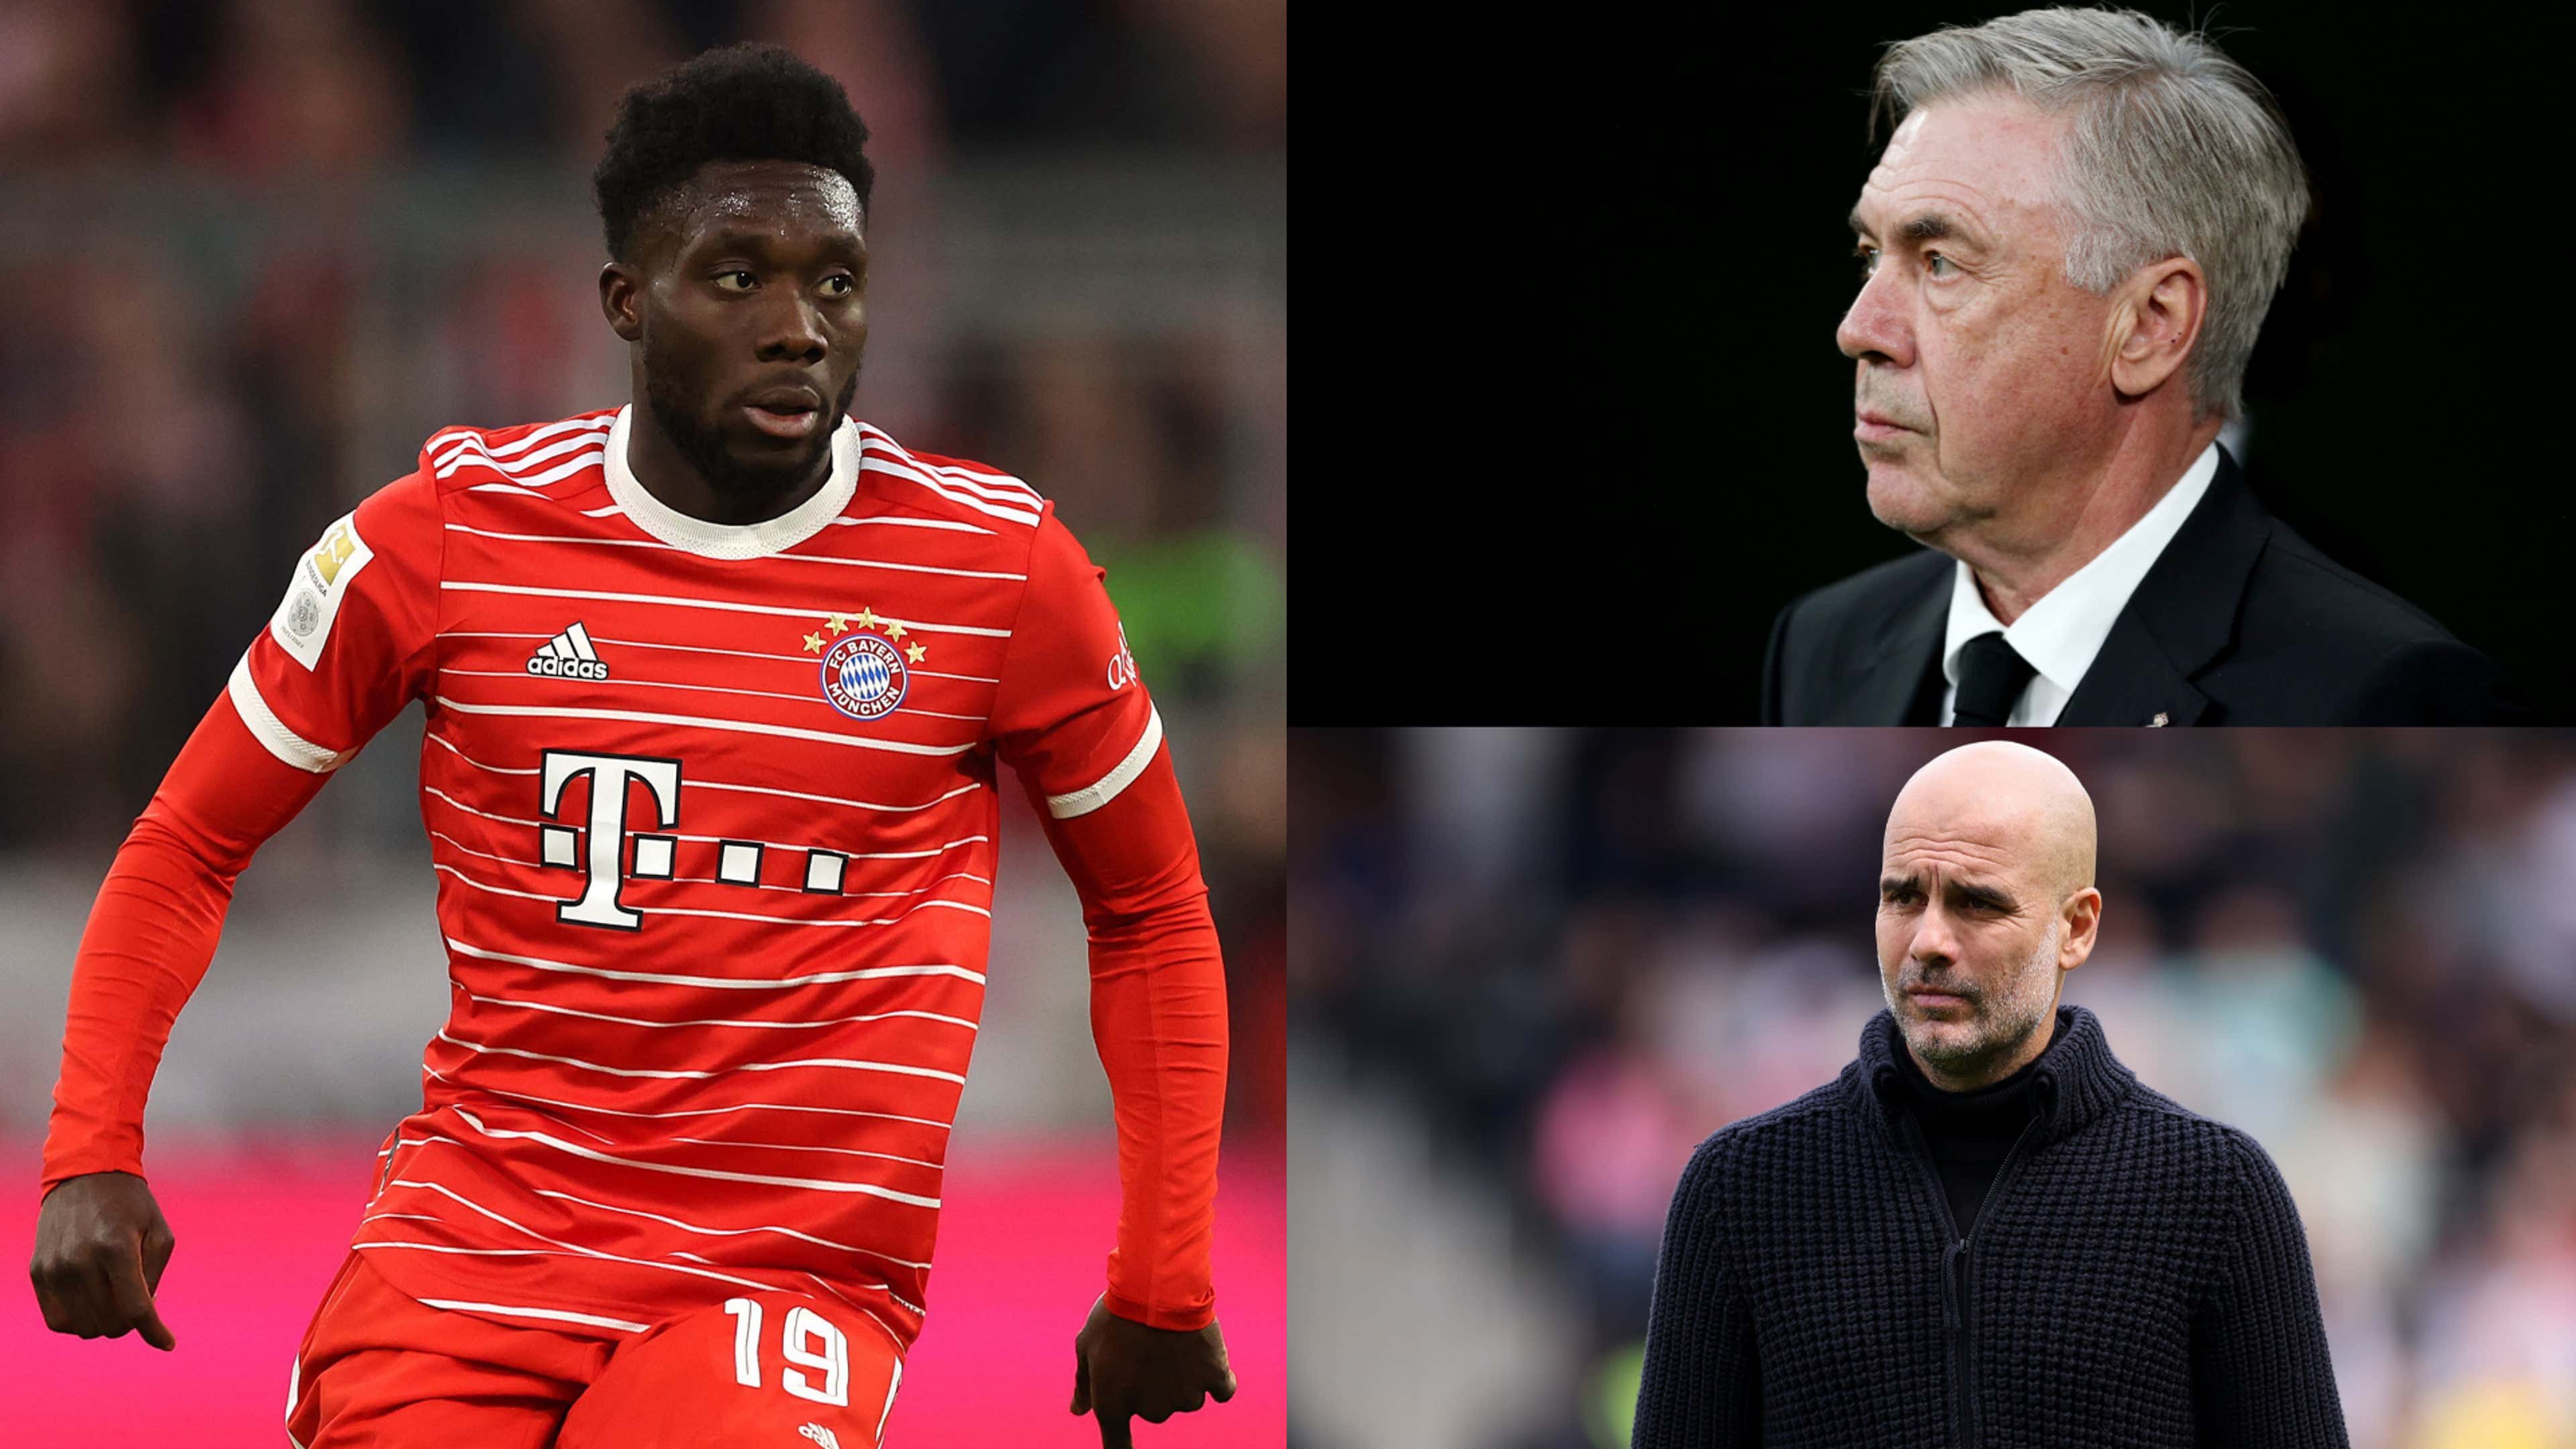 Alphonso Davies on Barcelona: 'They didn't want me because I was